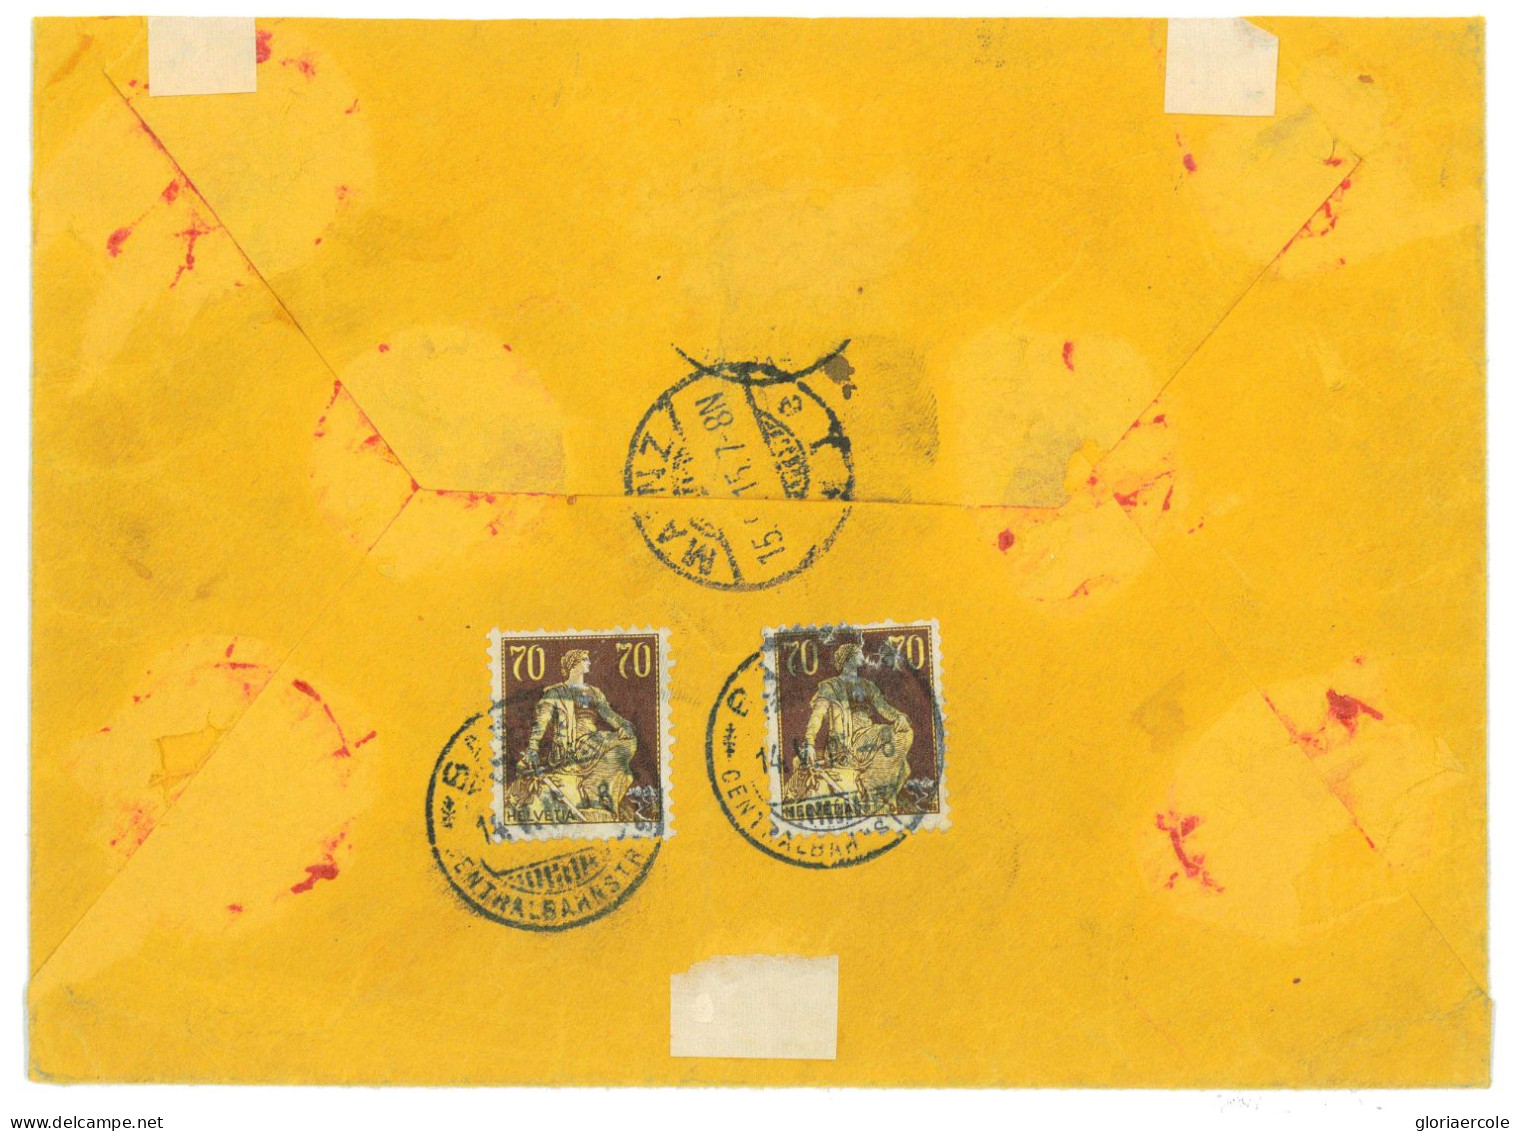 P3095 - SWITZERLAND NICE REGISTRED AND EXPRESS LETTER FROM BASEL, BEARING THE 10 FRANKS DEFINITIVE SBHV 131 ON THE FRONT - Storia Postale